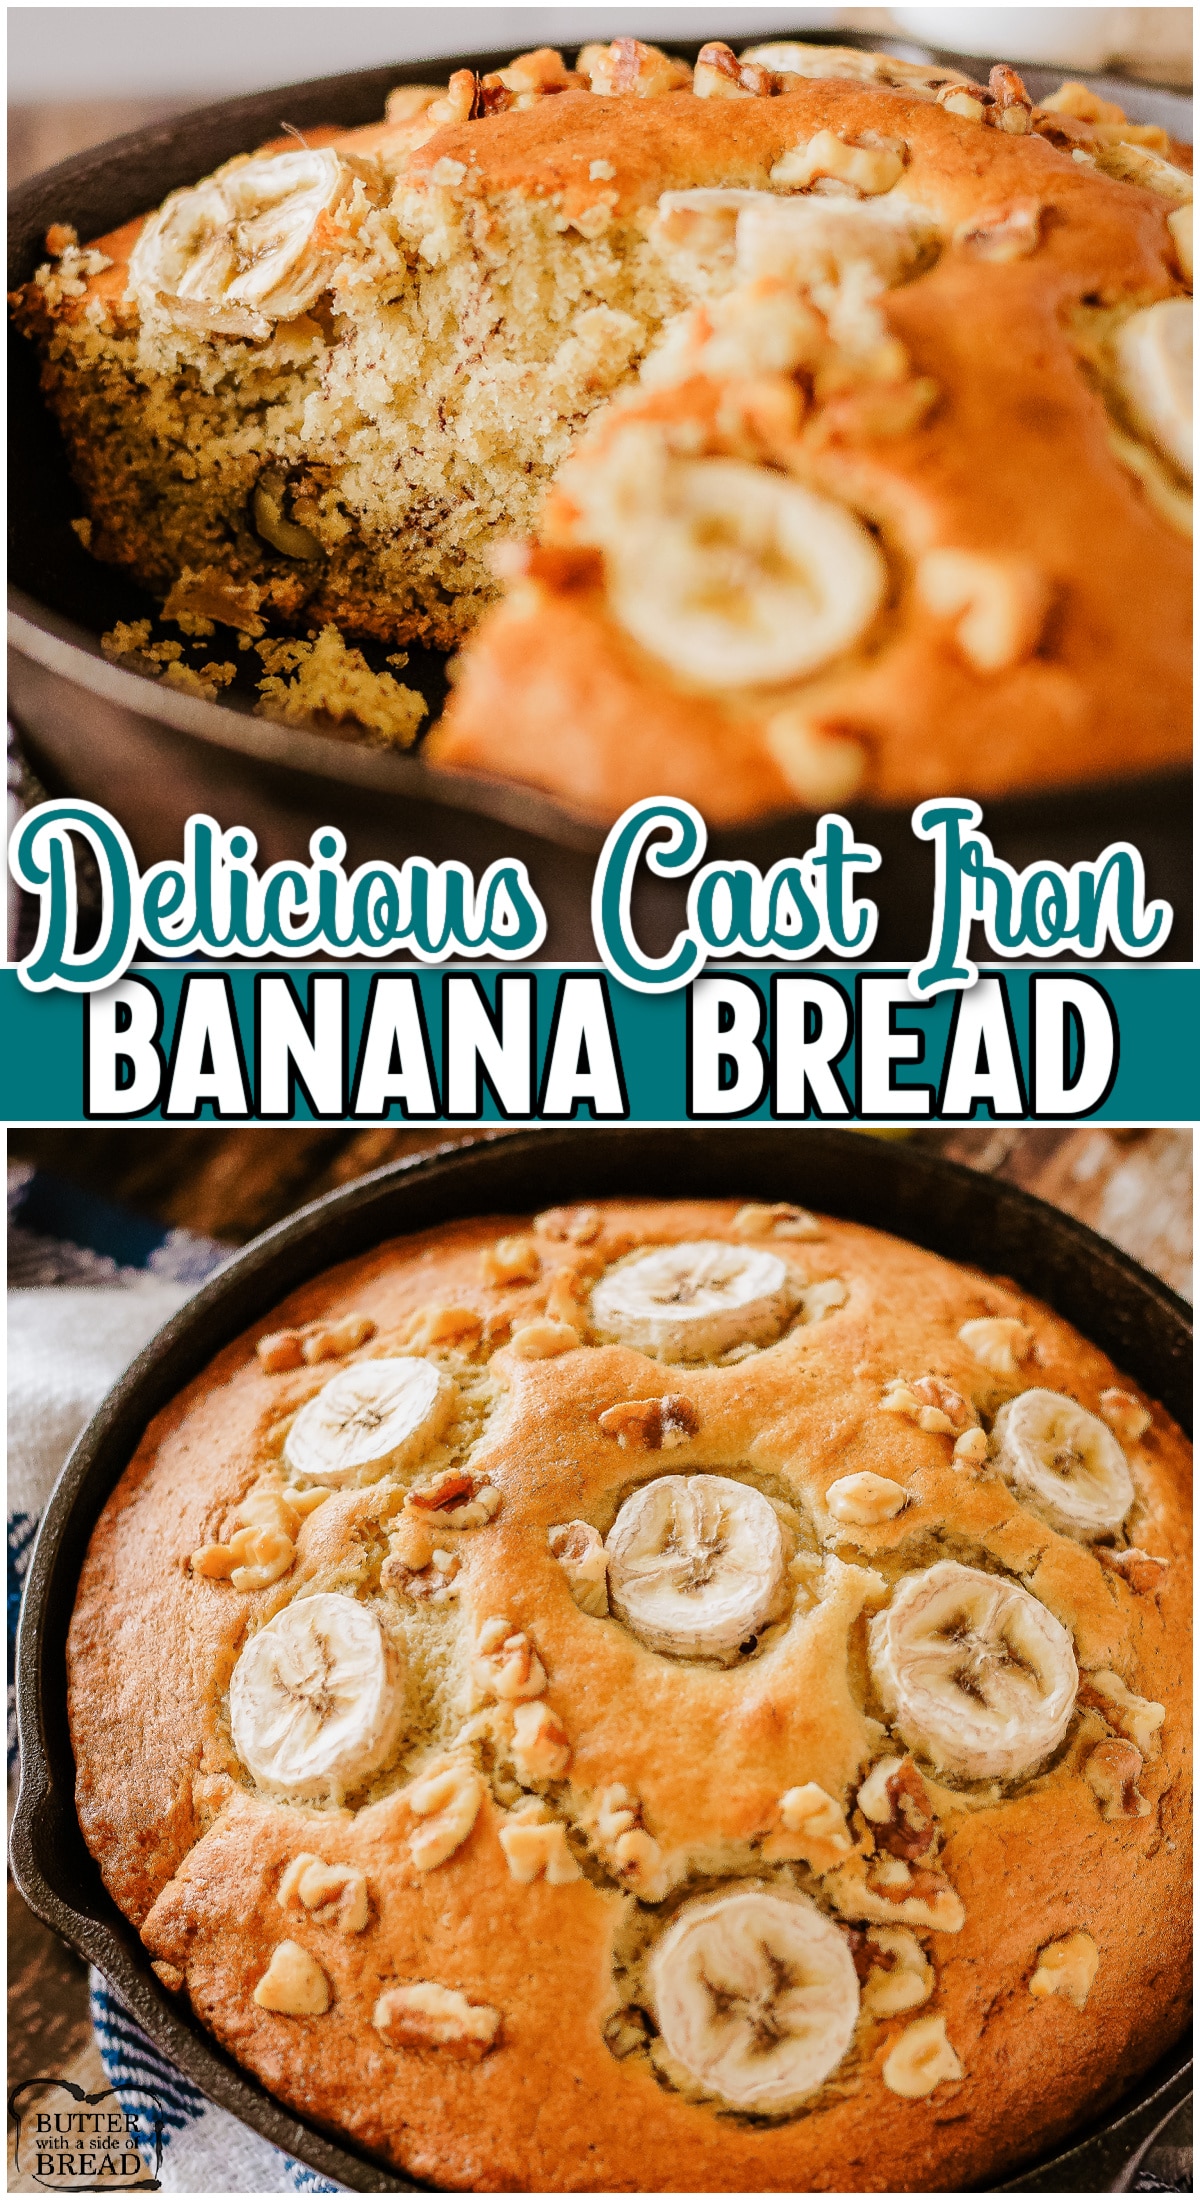 This incredible Cast Iron Banana Bread recipe takes what you already know and love about banana bread, but baked in a skillet! Your family is sure to enjoy this moist, soft homemade banana bread.